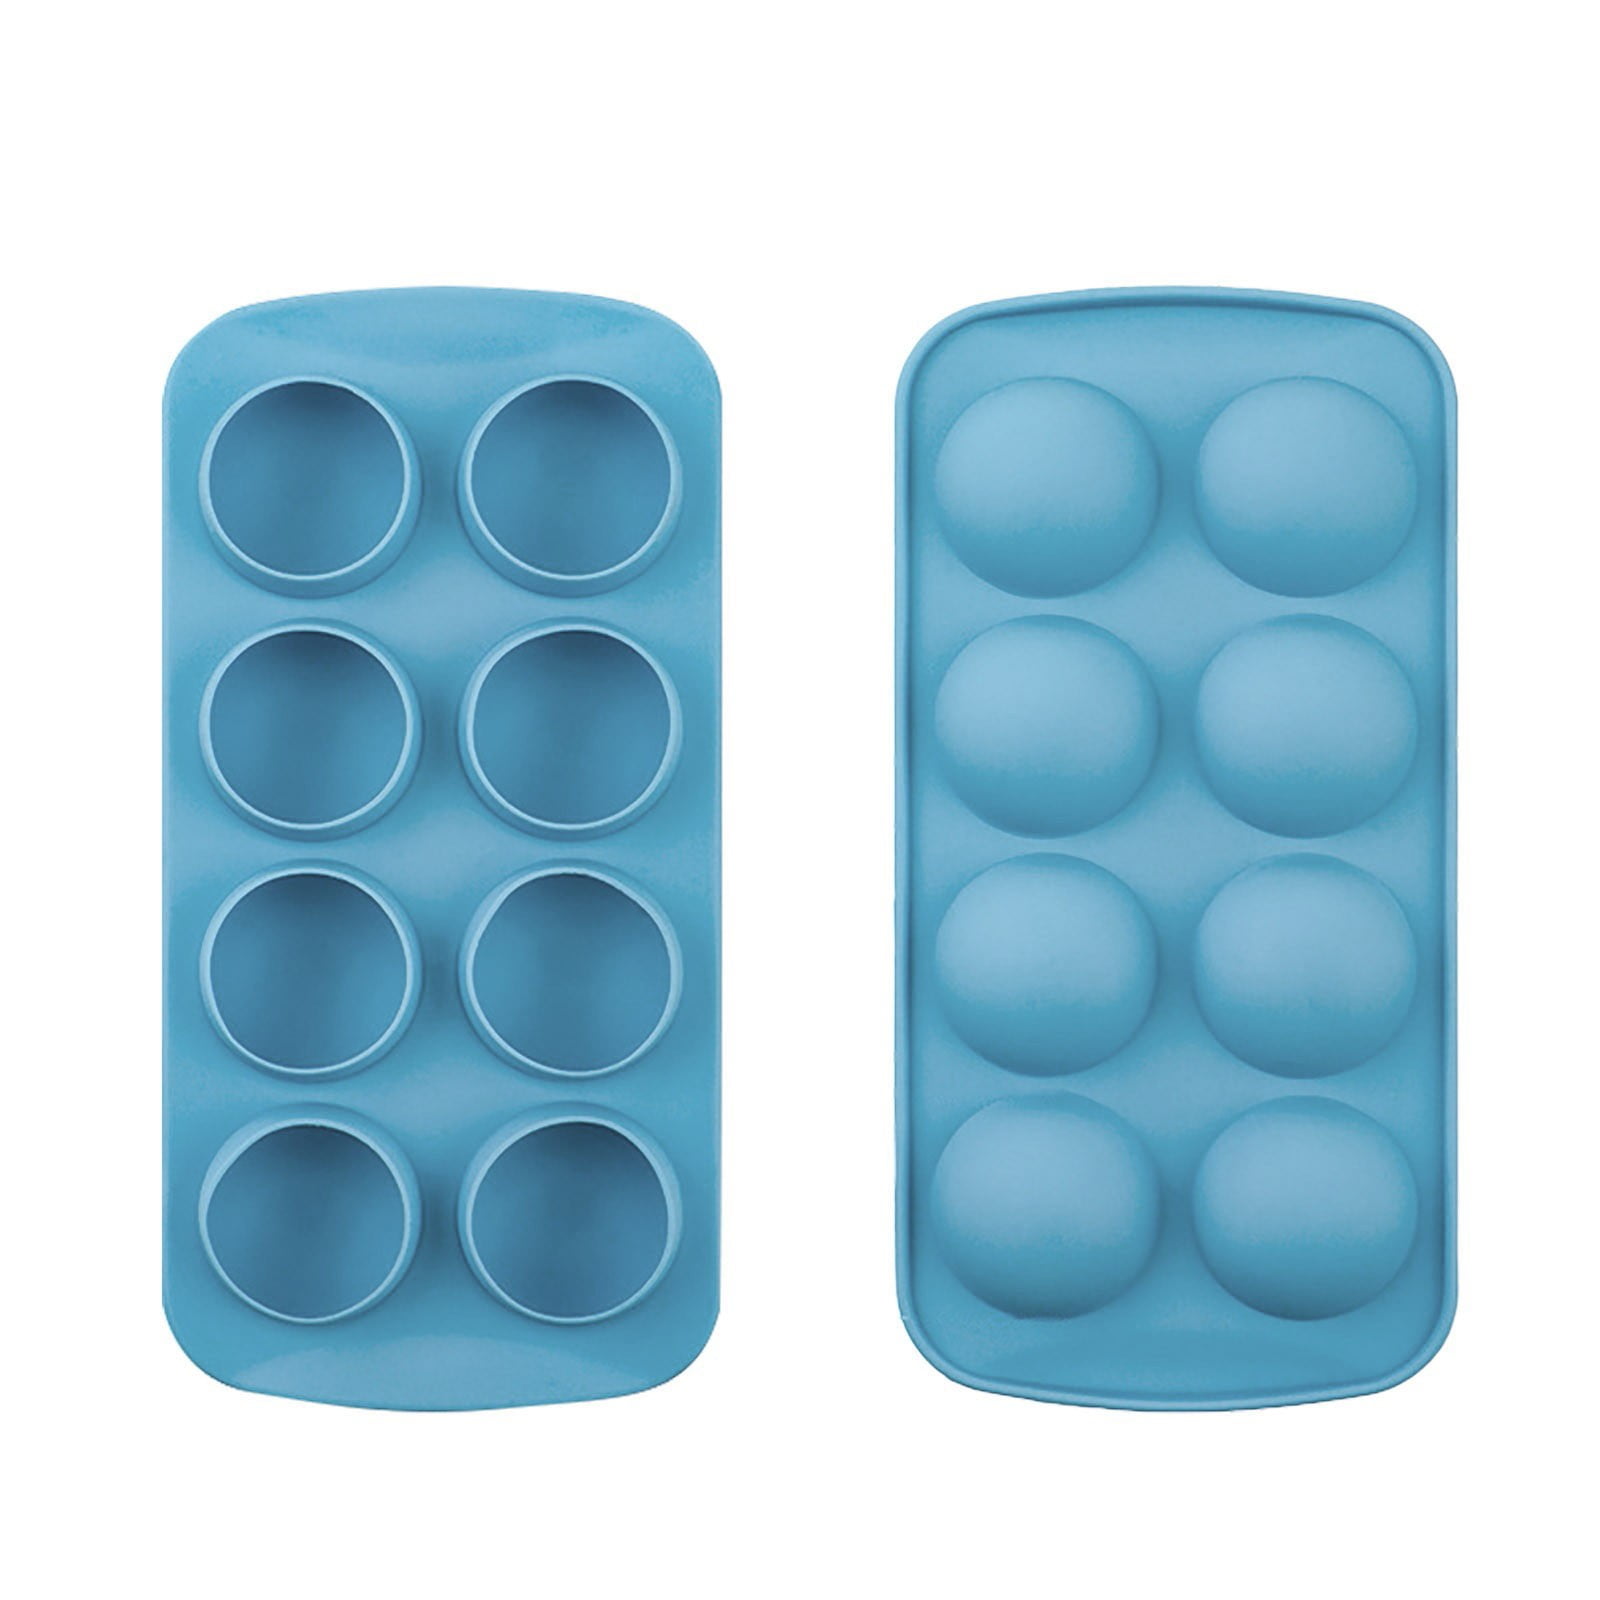 JDEFEG Metal Ice Cubes Stones Flexible Ice Tray 4 Ice Molds for